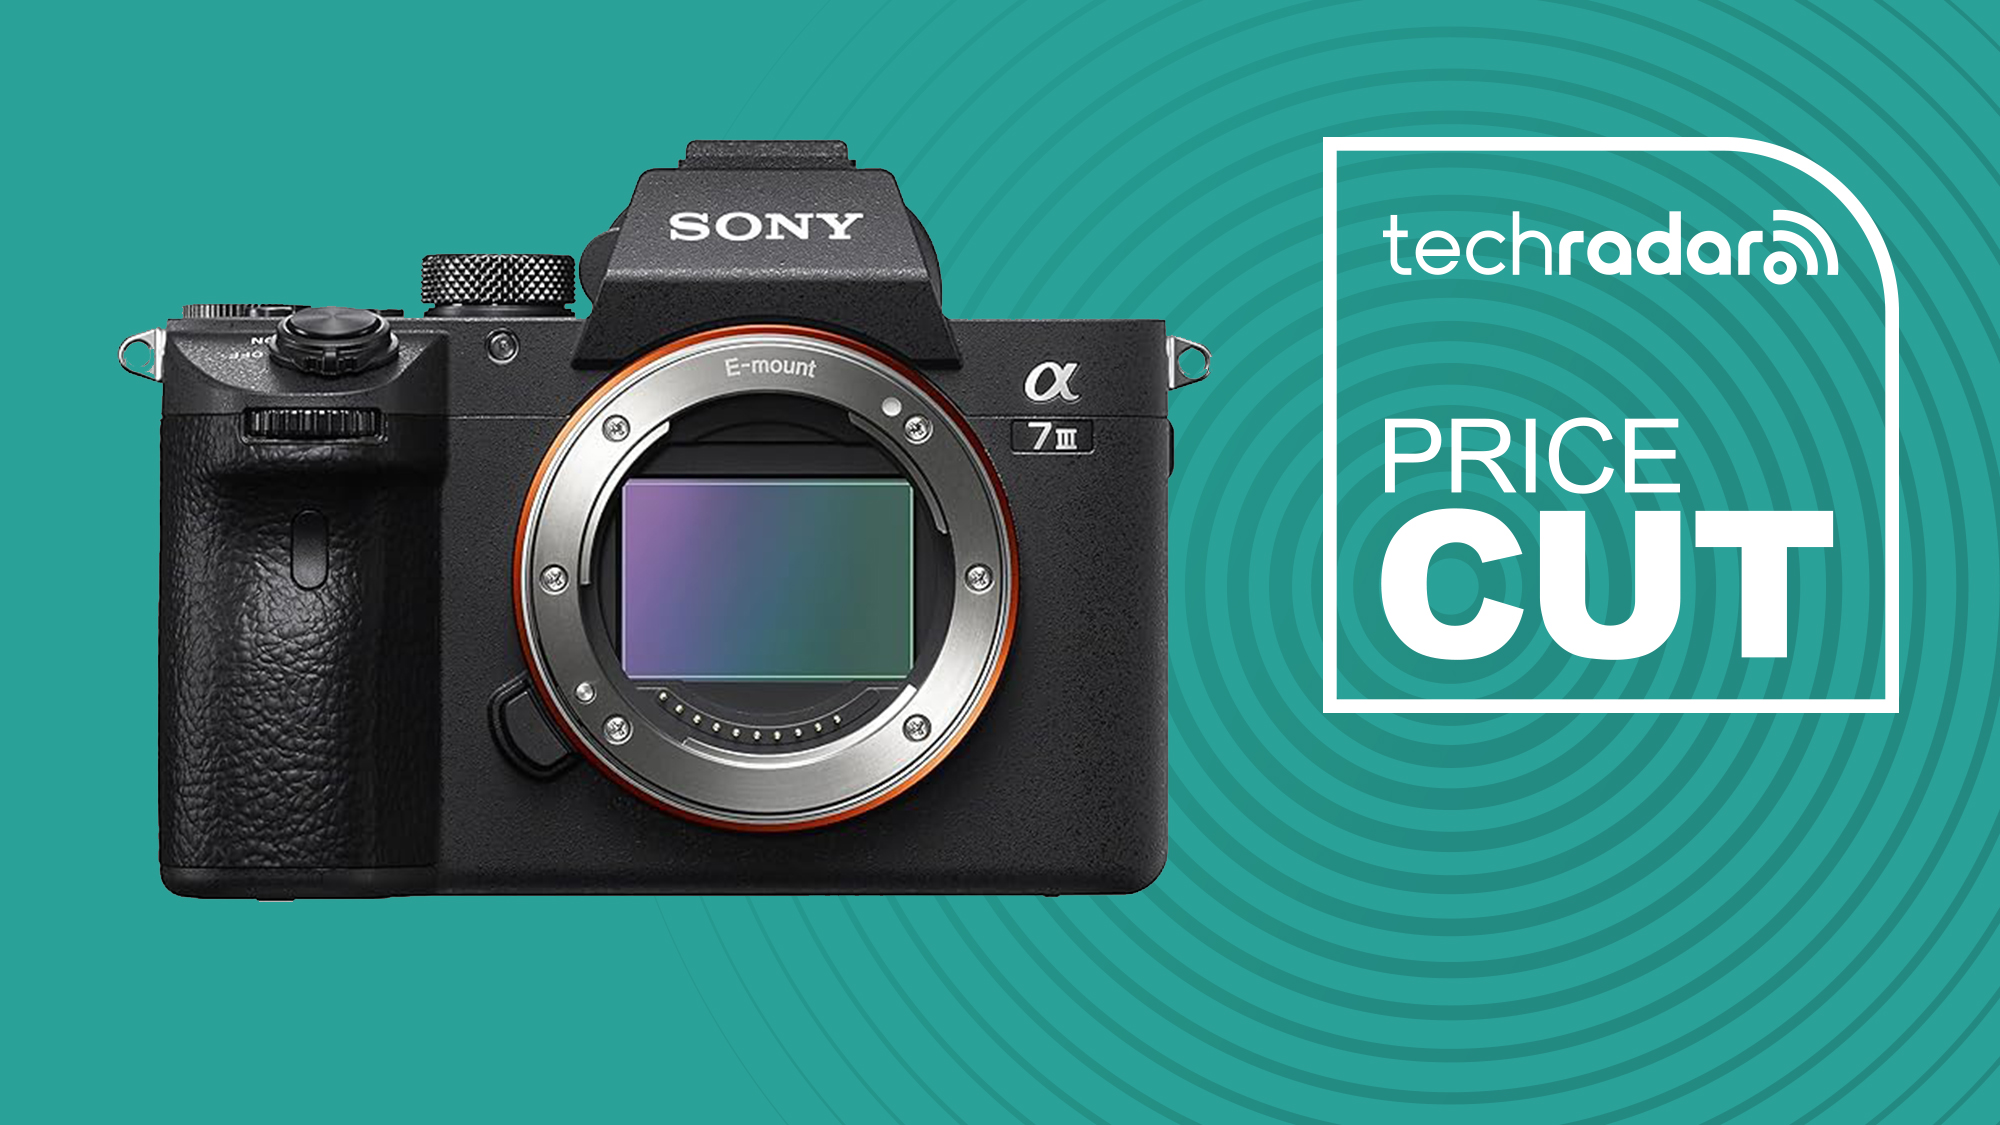 There's nothing that can touch it: Sony Alpha 7 III falls to record-low price at Amazon